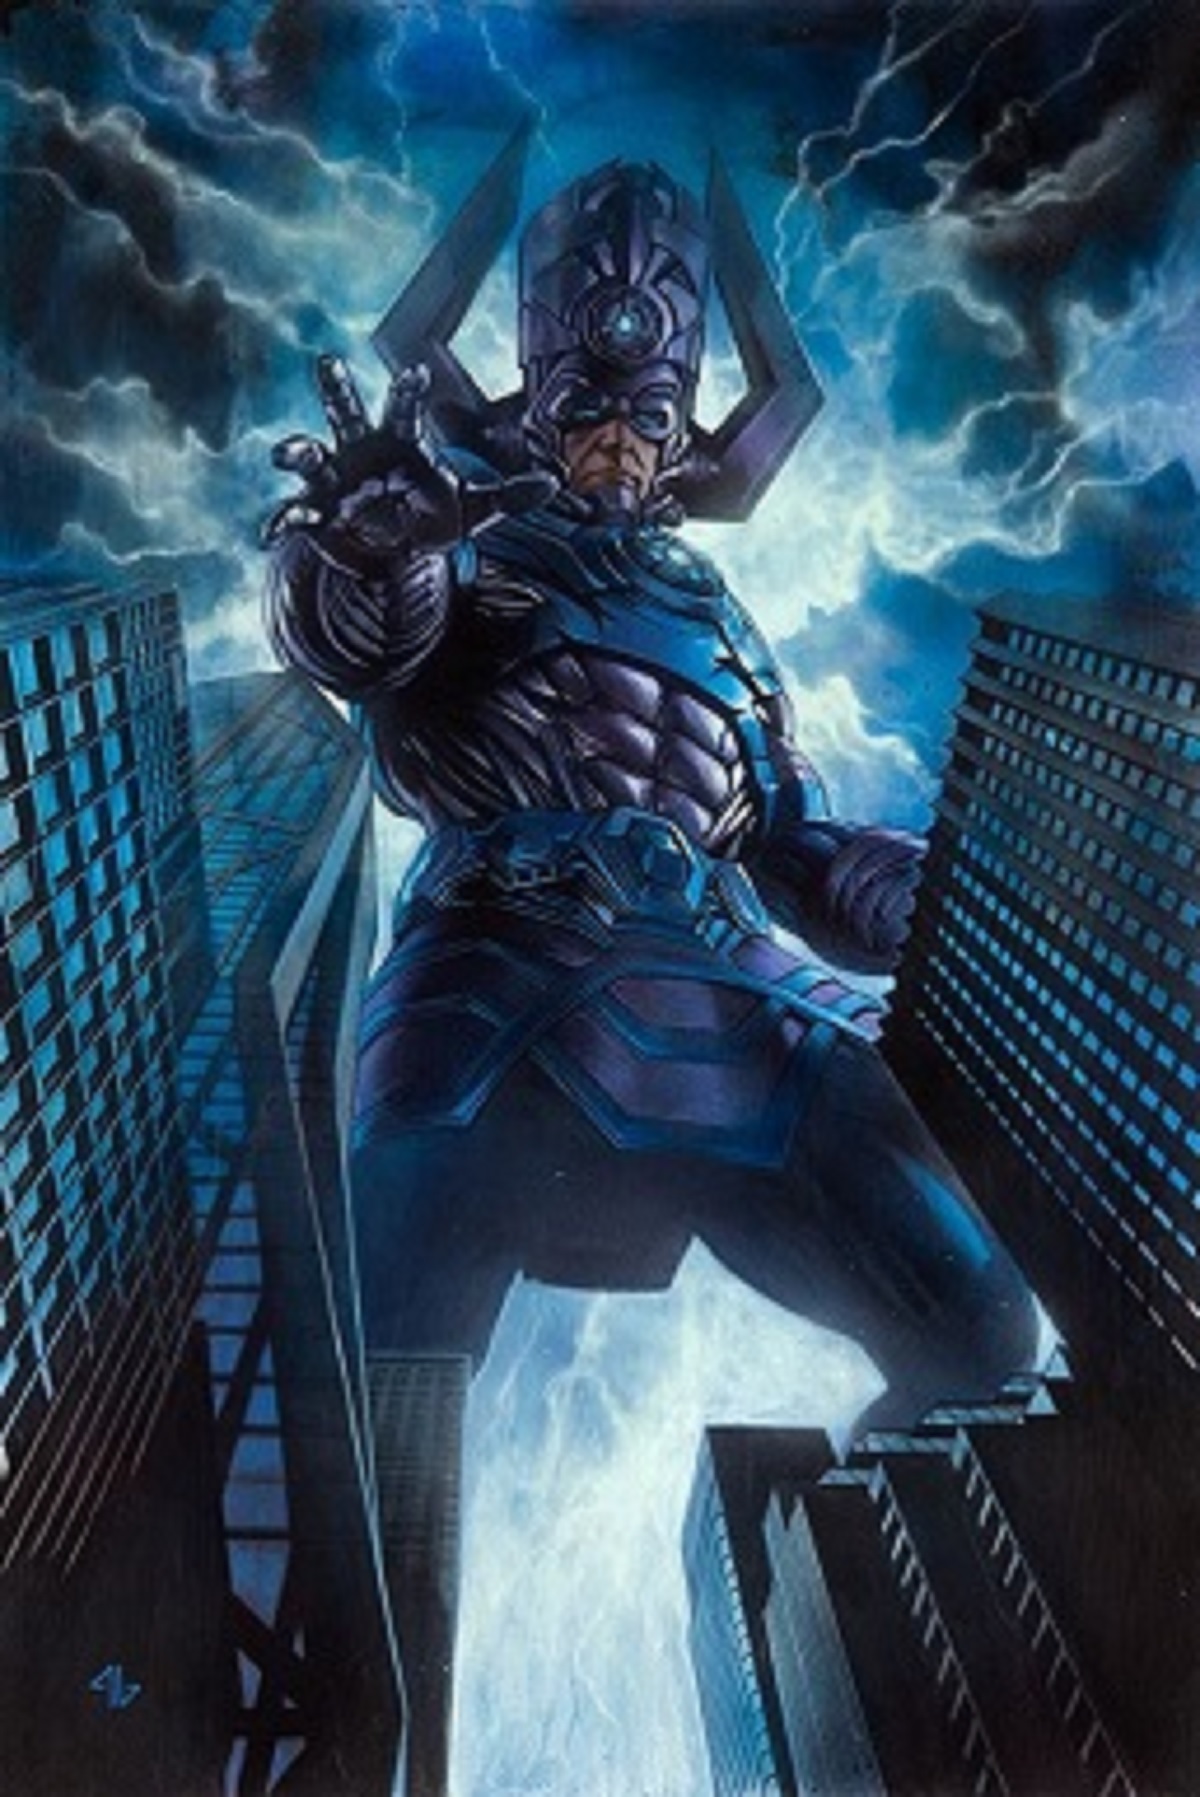 HOW DANGEROUS IS THE GALACTUS